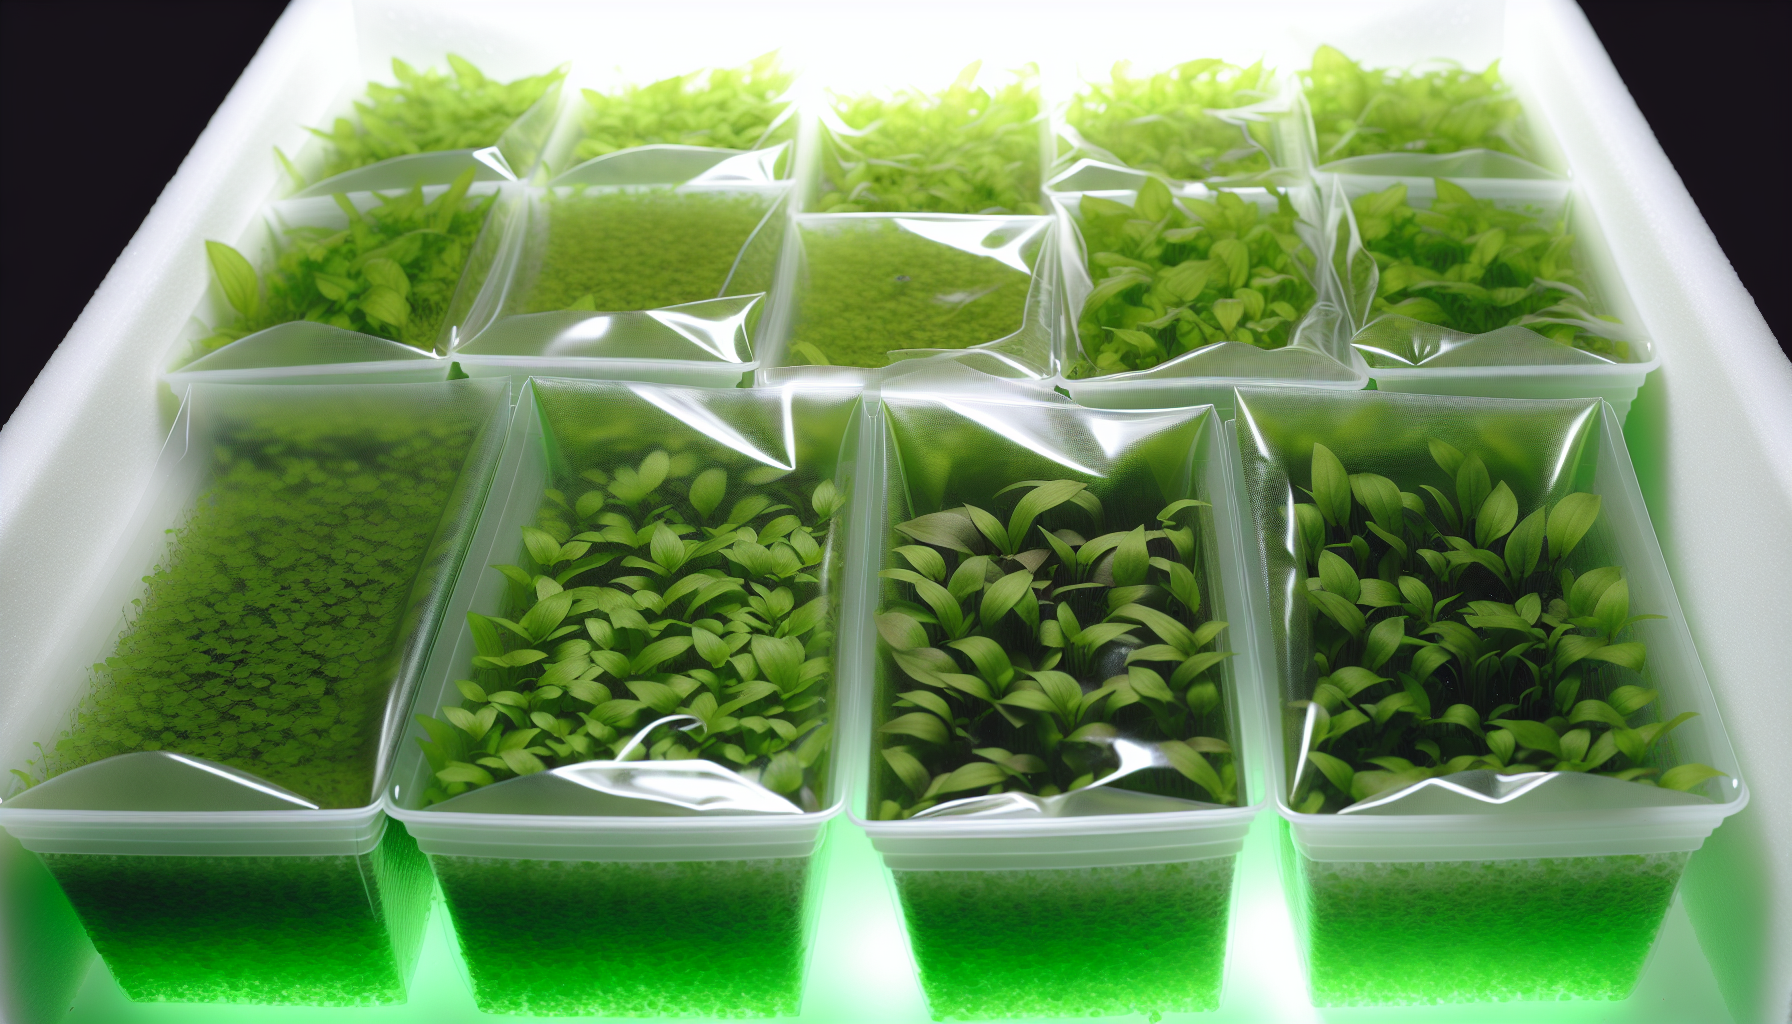 Tissue culture plants in sterile containers ready for acclimation and planting